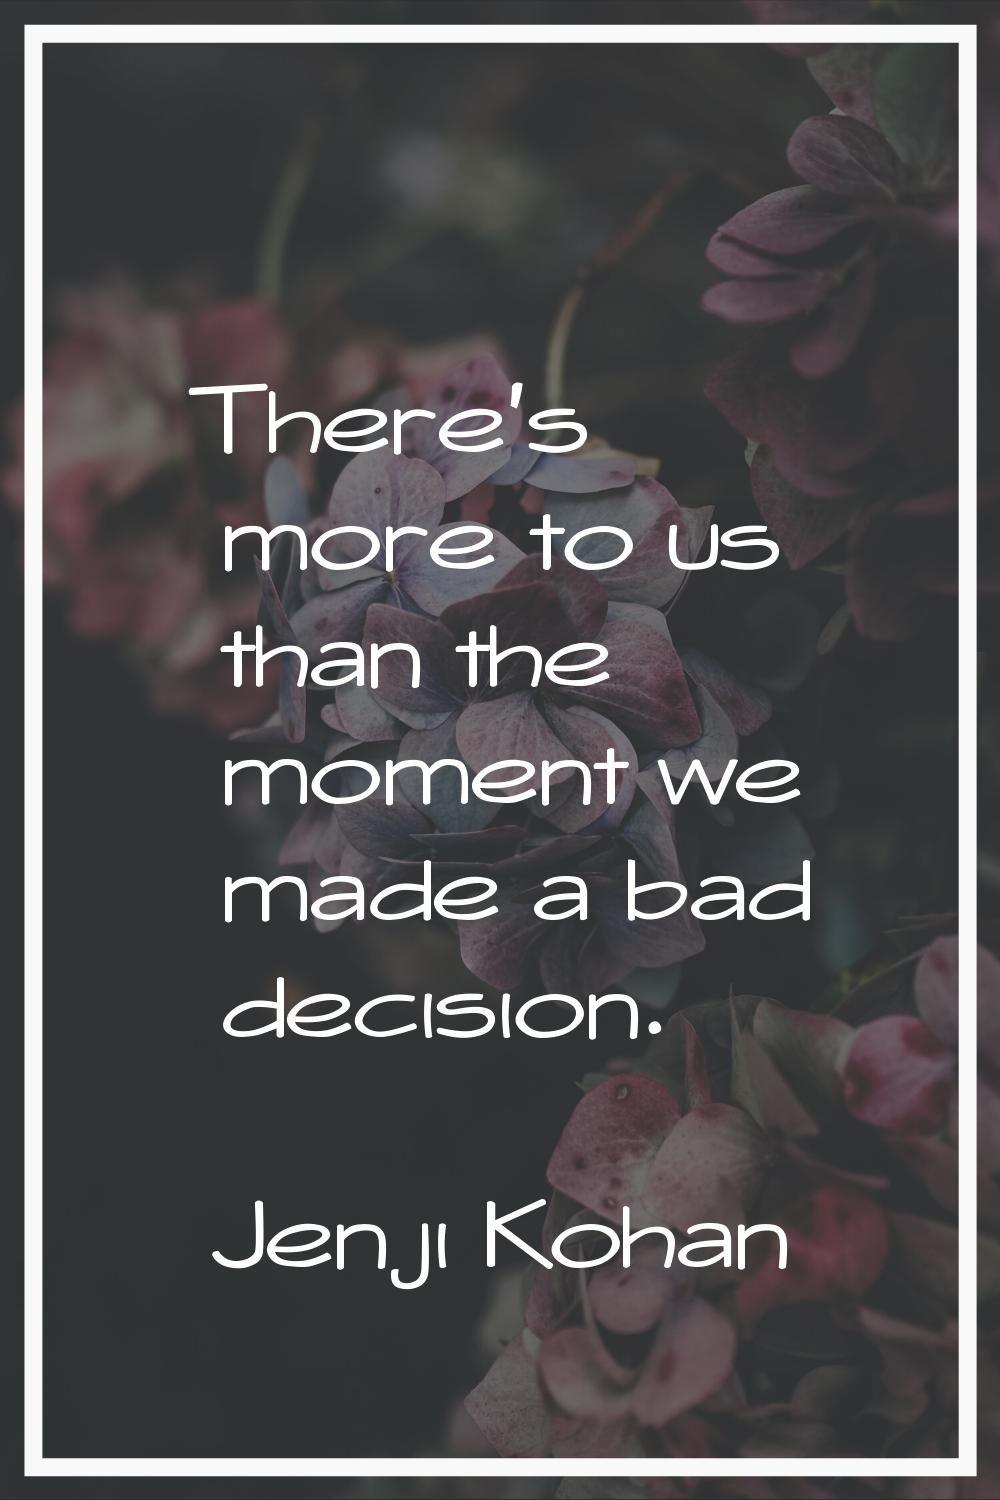 There's more to us than the moment we made a bad decision.